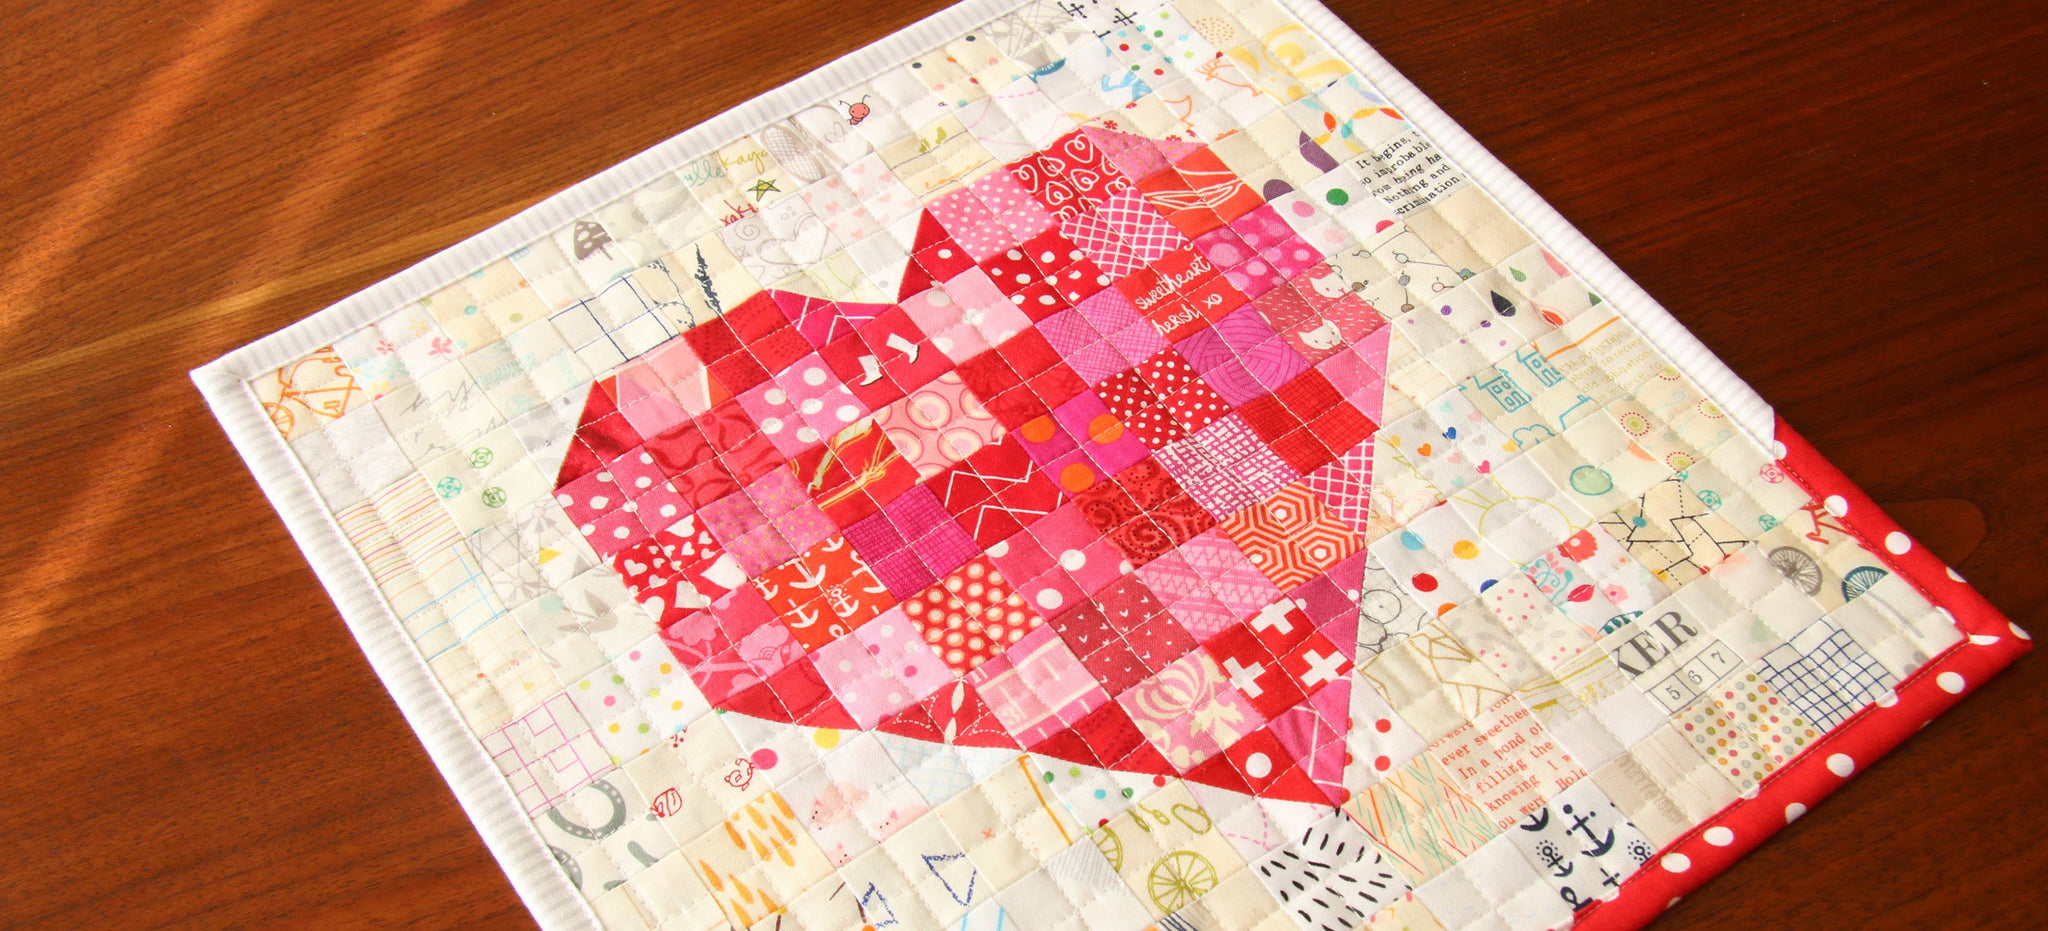 8 Pieces Valentines Day Fabric Heart Printed Fabric Squares Quilting  Patchwork, Valentine Day DIY Patchwork Quilting Fabric for Valentines Day  DIY